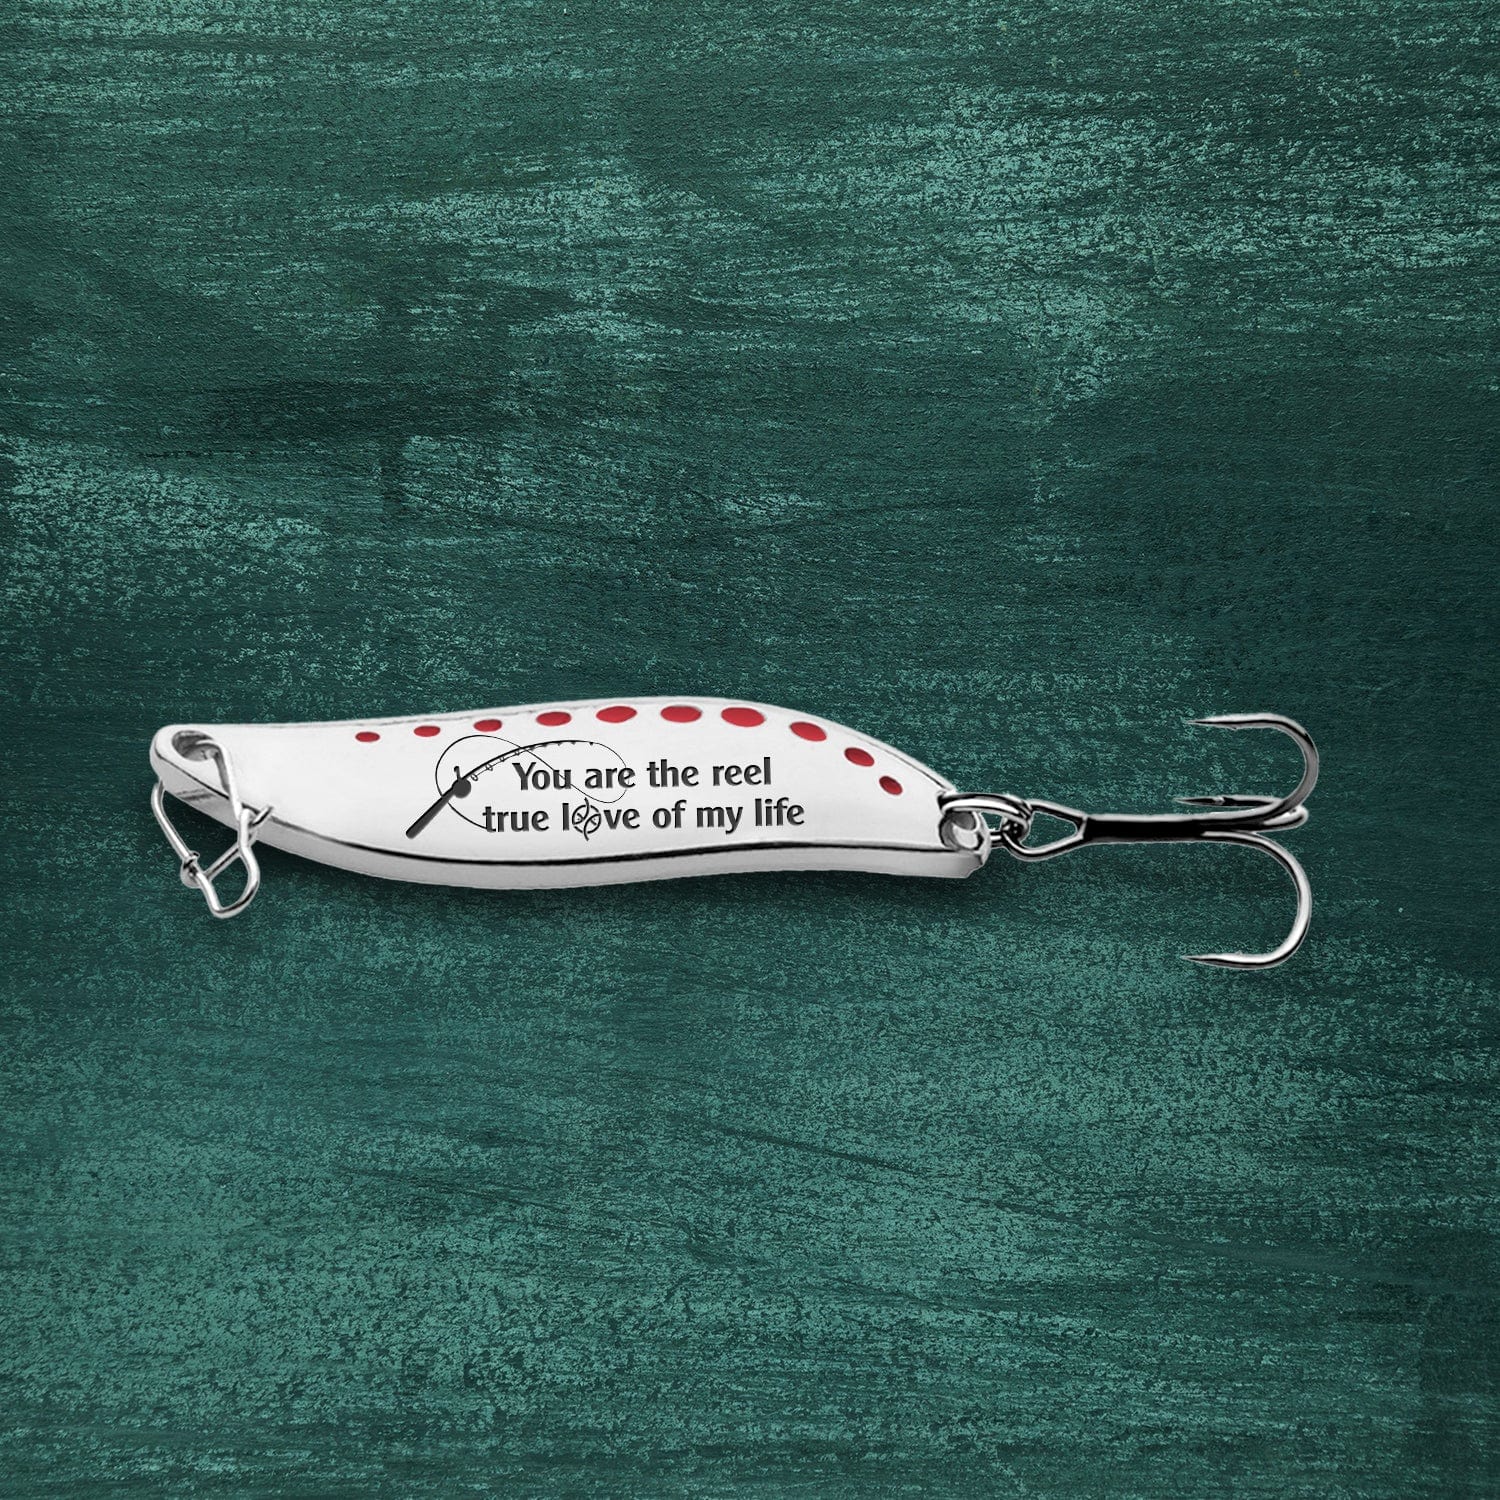 Fishing Lures - Fishing - To My Master Baiter - I Love You More